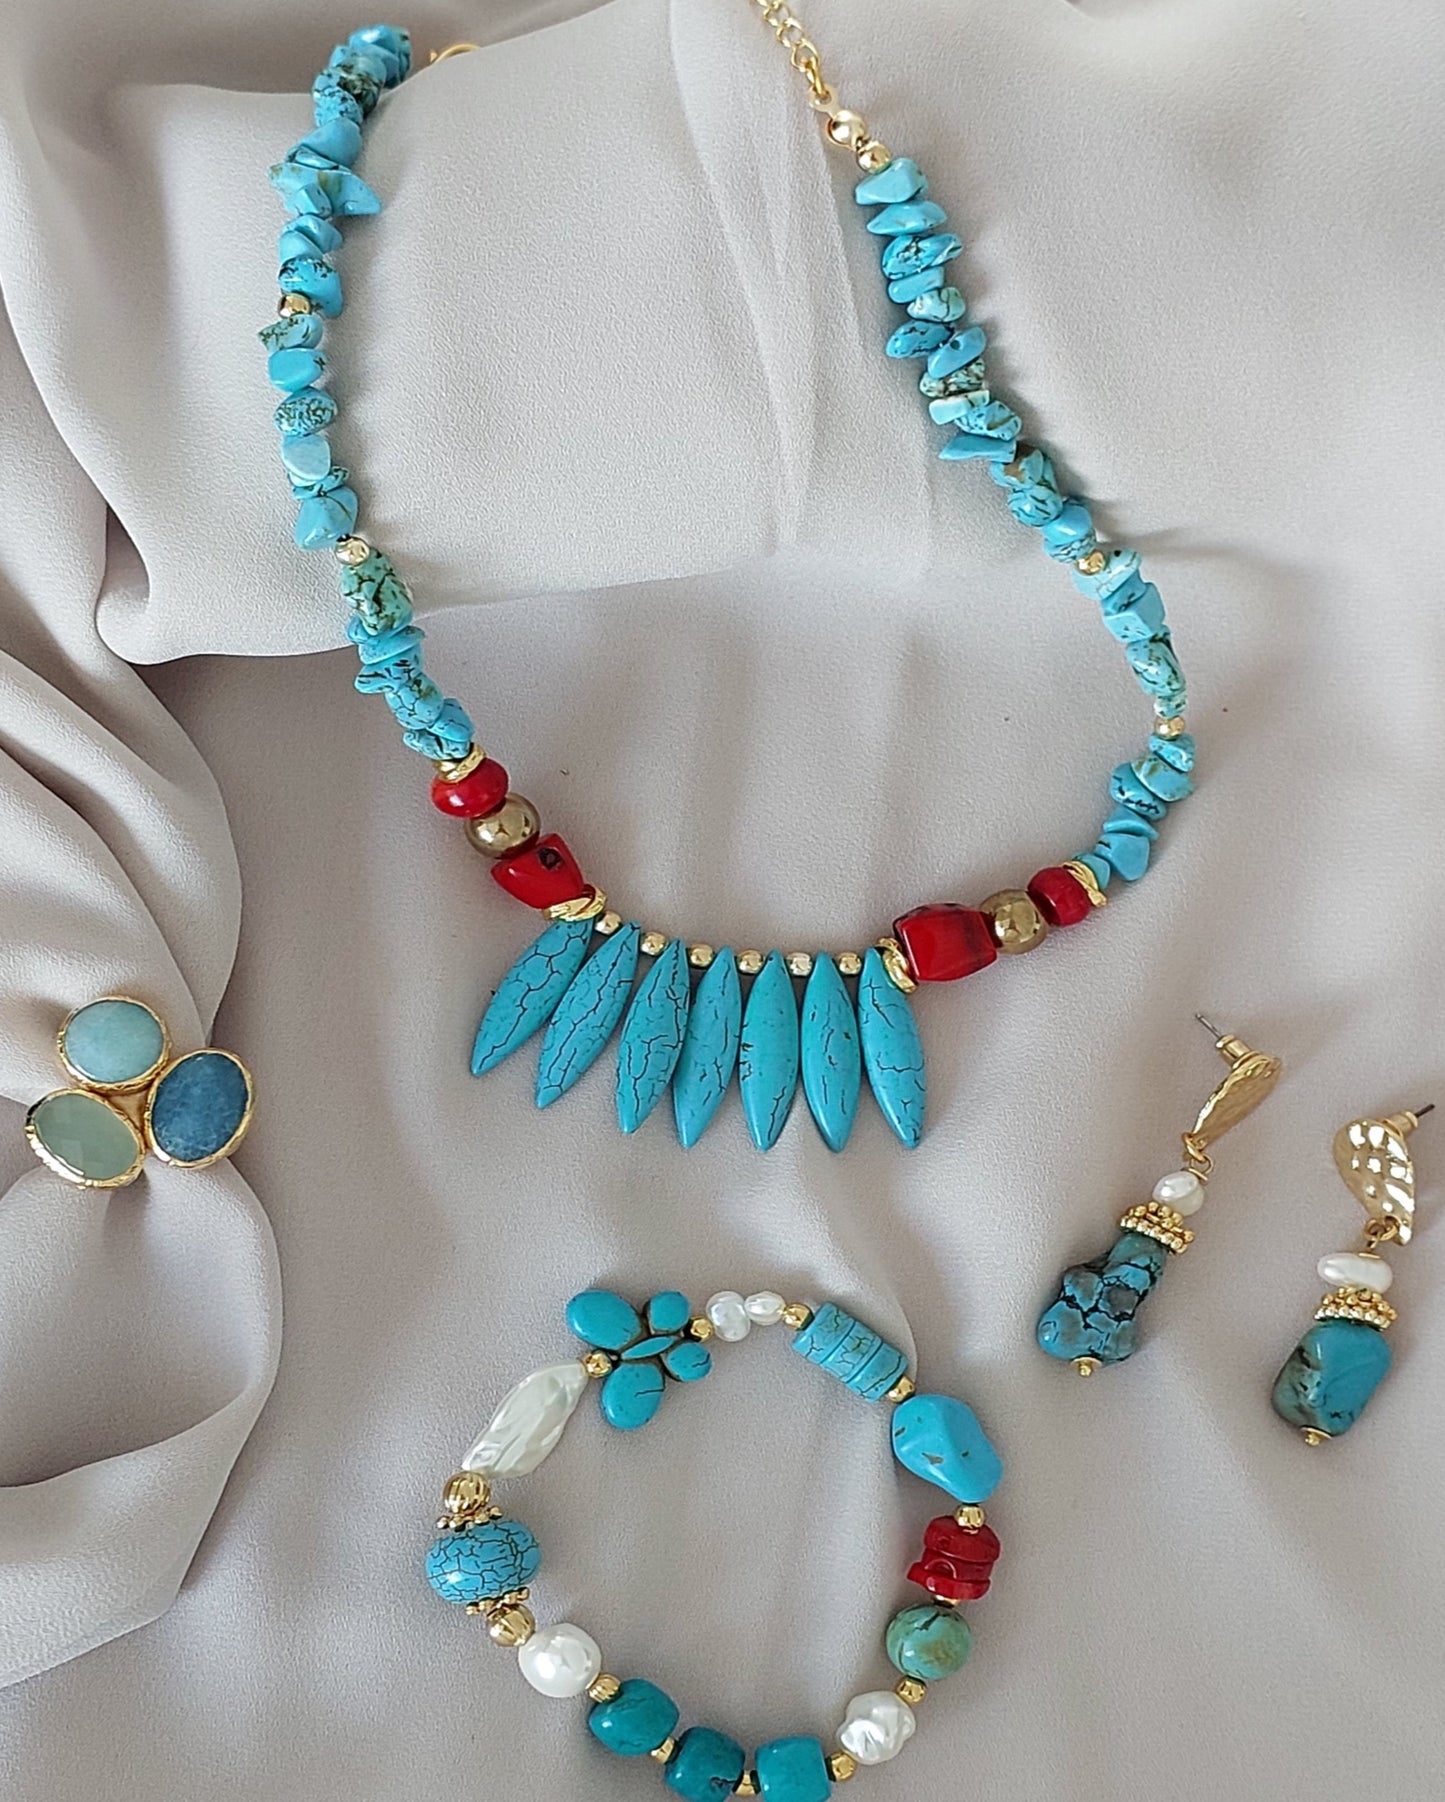 Jewelry Set Necklace Bracelet Ring Earrings Handmade Gemstones Turquoise and Red Beads Multi-size Stones Great for Gifts 4 pieces